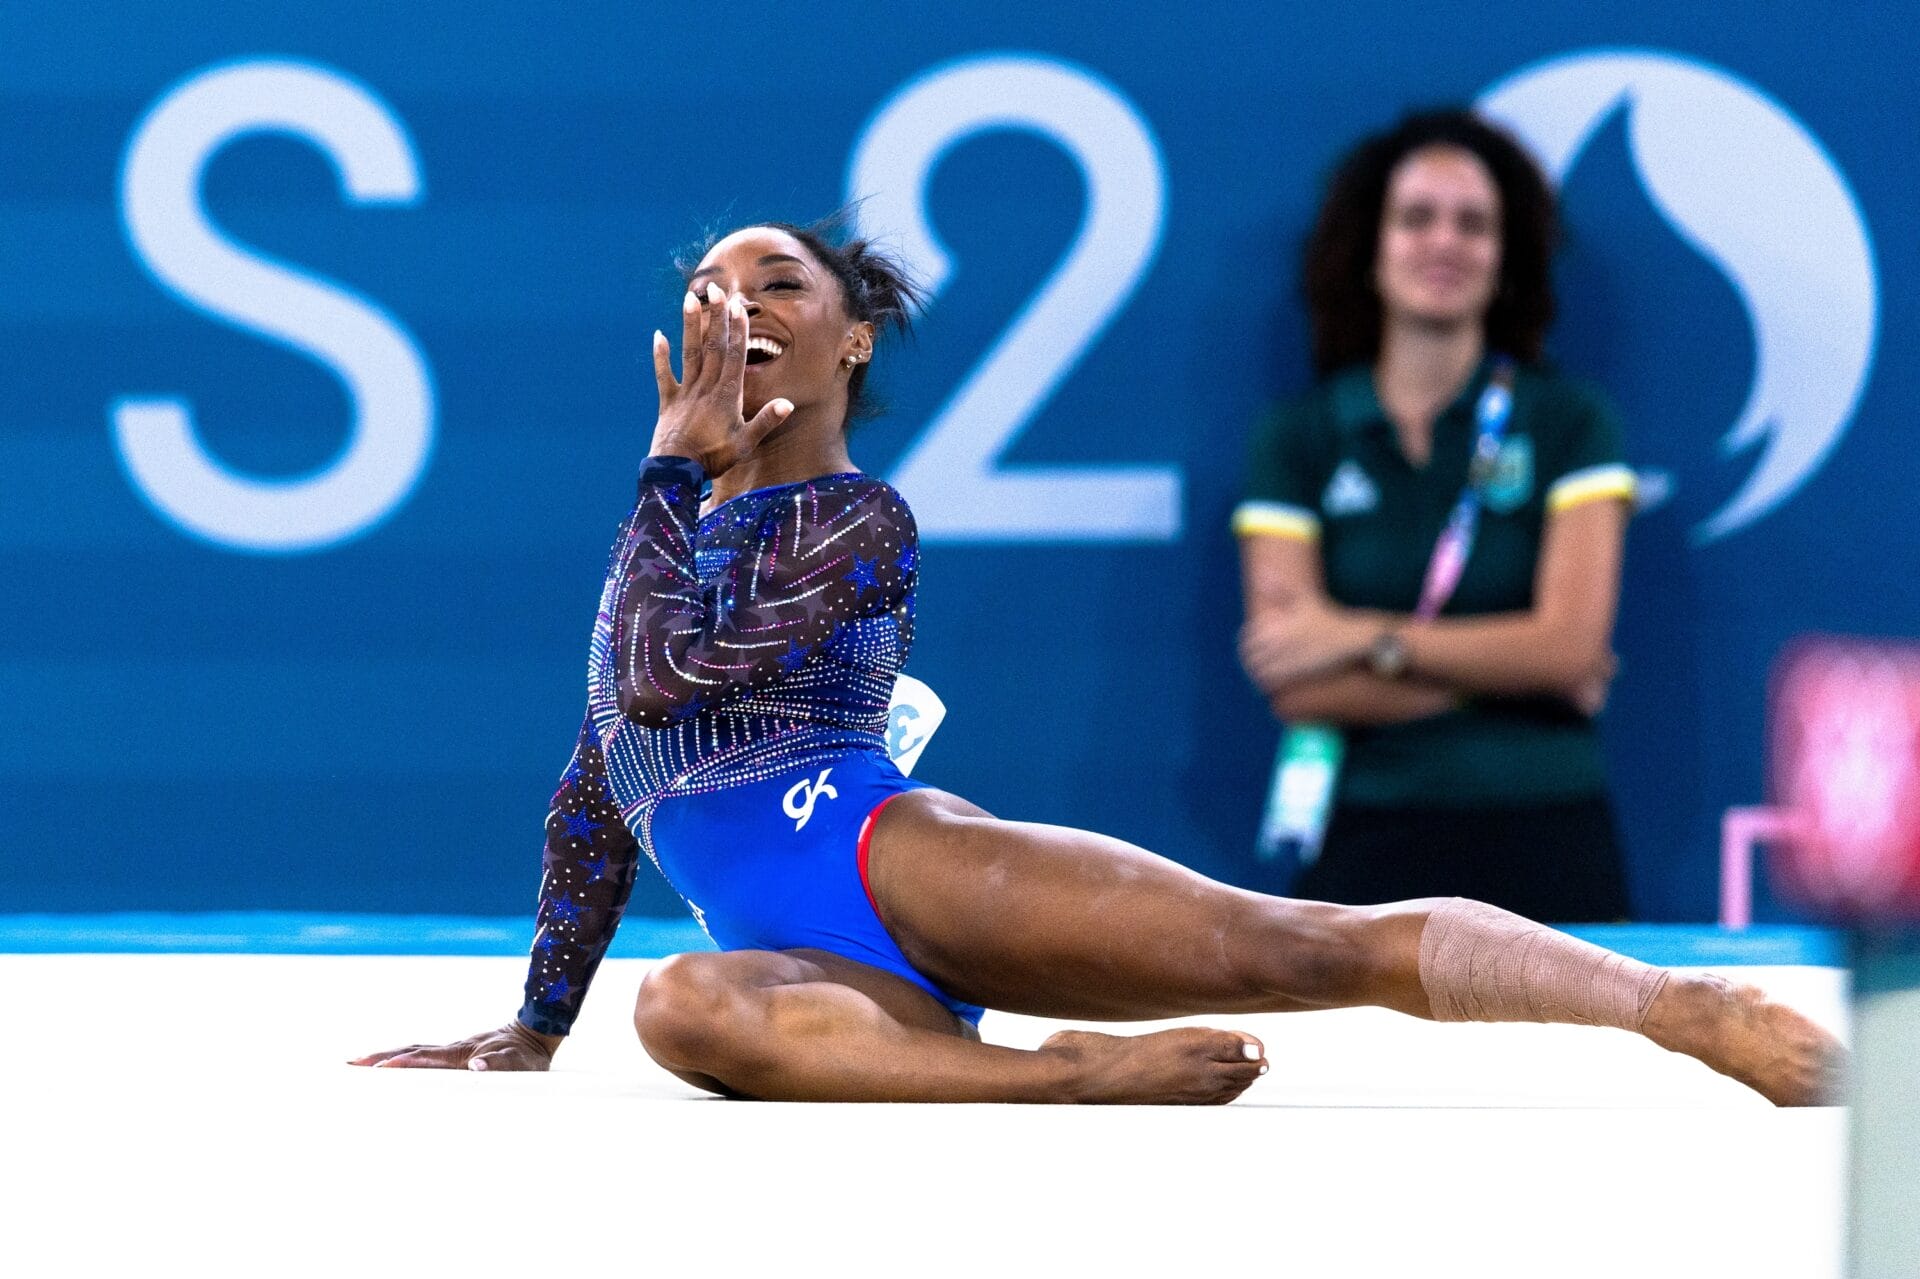 PARIS, FRANCE - AUGUST 01: Simone Biles of United States competes at the artistic gymnastics women's all-around final of the Paris 2024 Olympic Games at the Bercy Arena in Paris, France on August 01, 2024. (Photo by Aytac Unal/Anadolu via Getty Images)